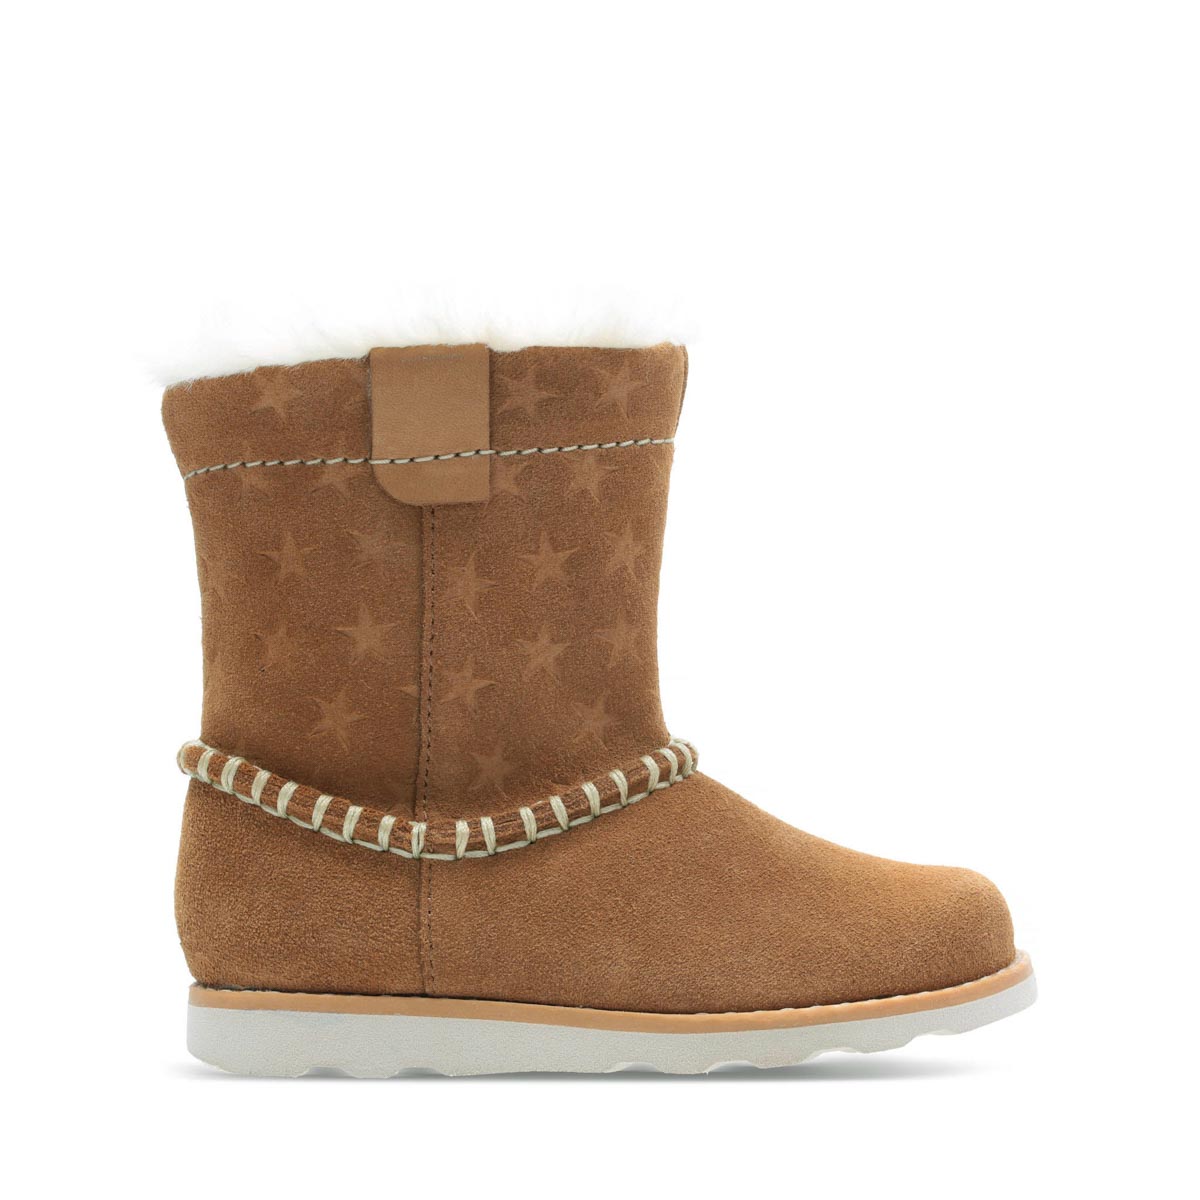 Clarks Crown Piper T Tan Suede Kids Toddler Girls Boots 4387-27G in a Plain Leather in Size 9